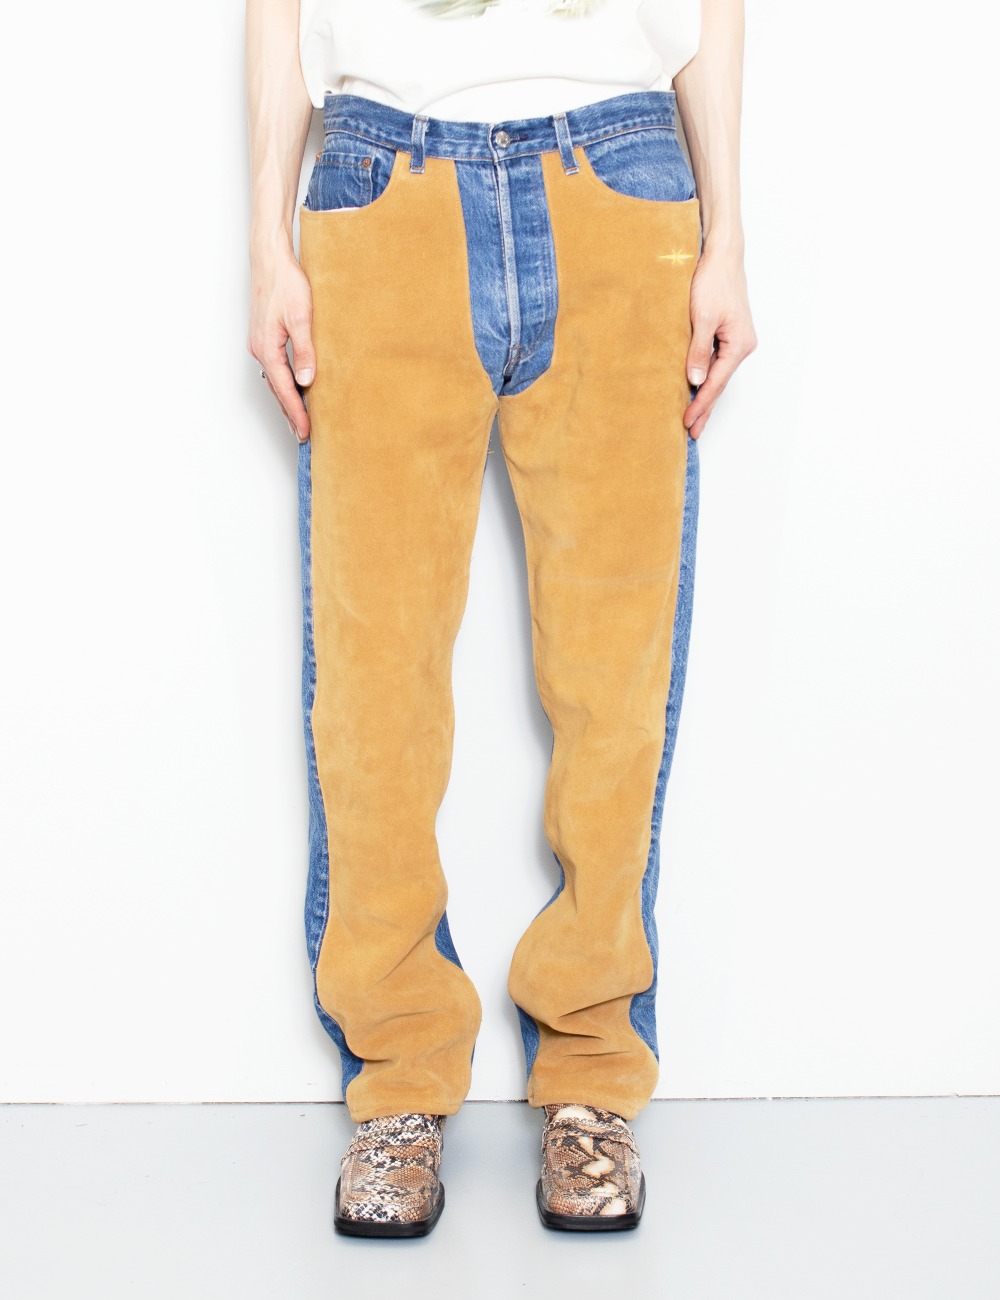 CHAPS JEANS_BROWN